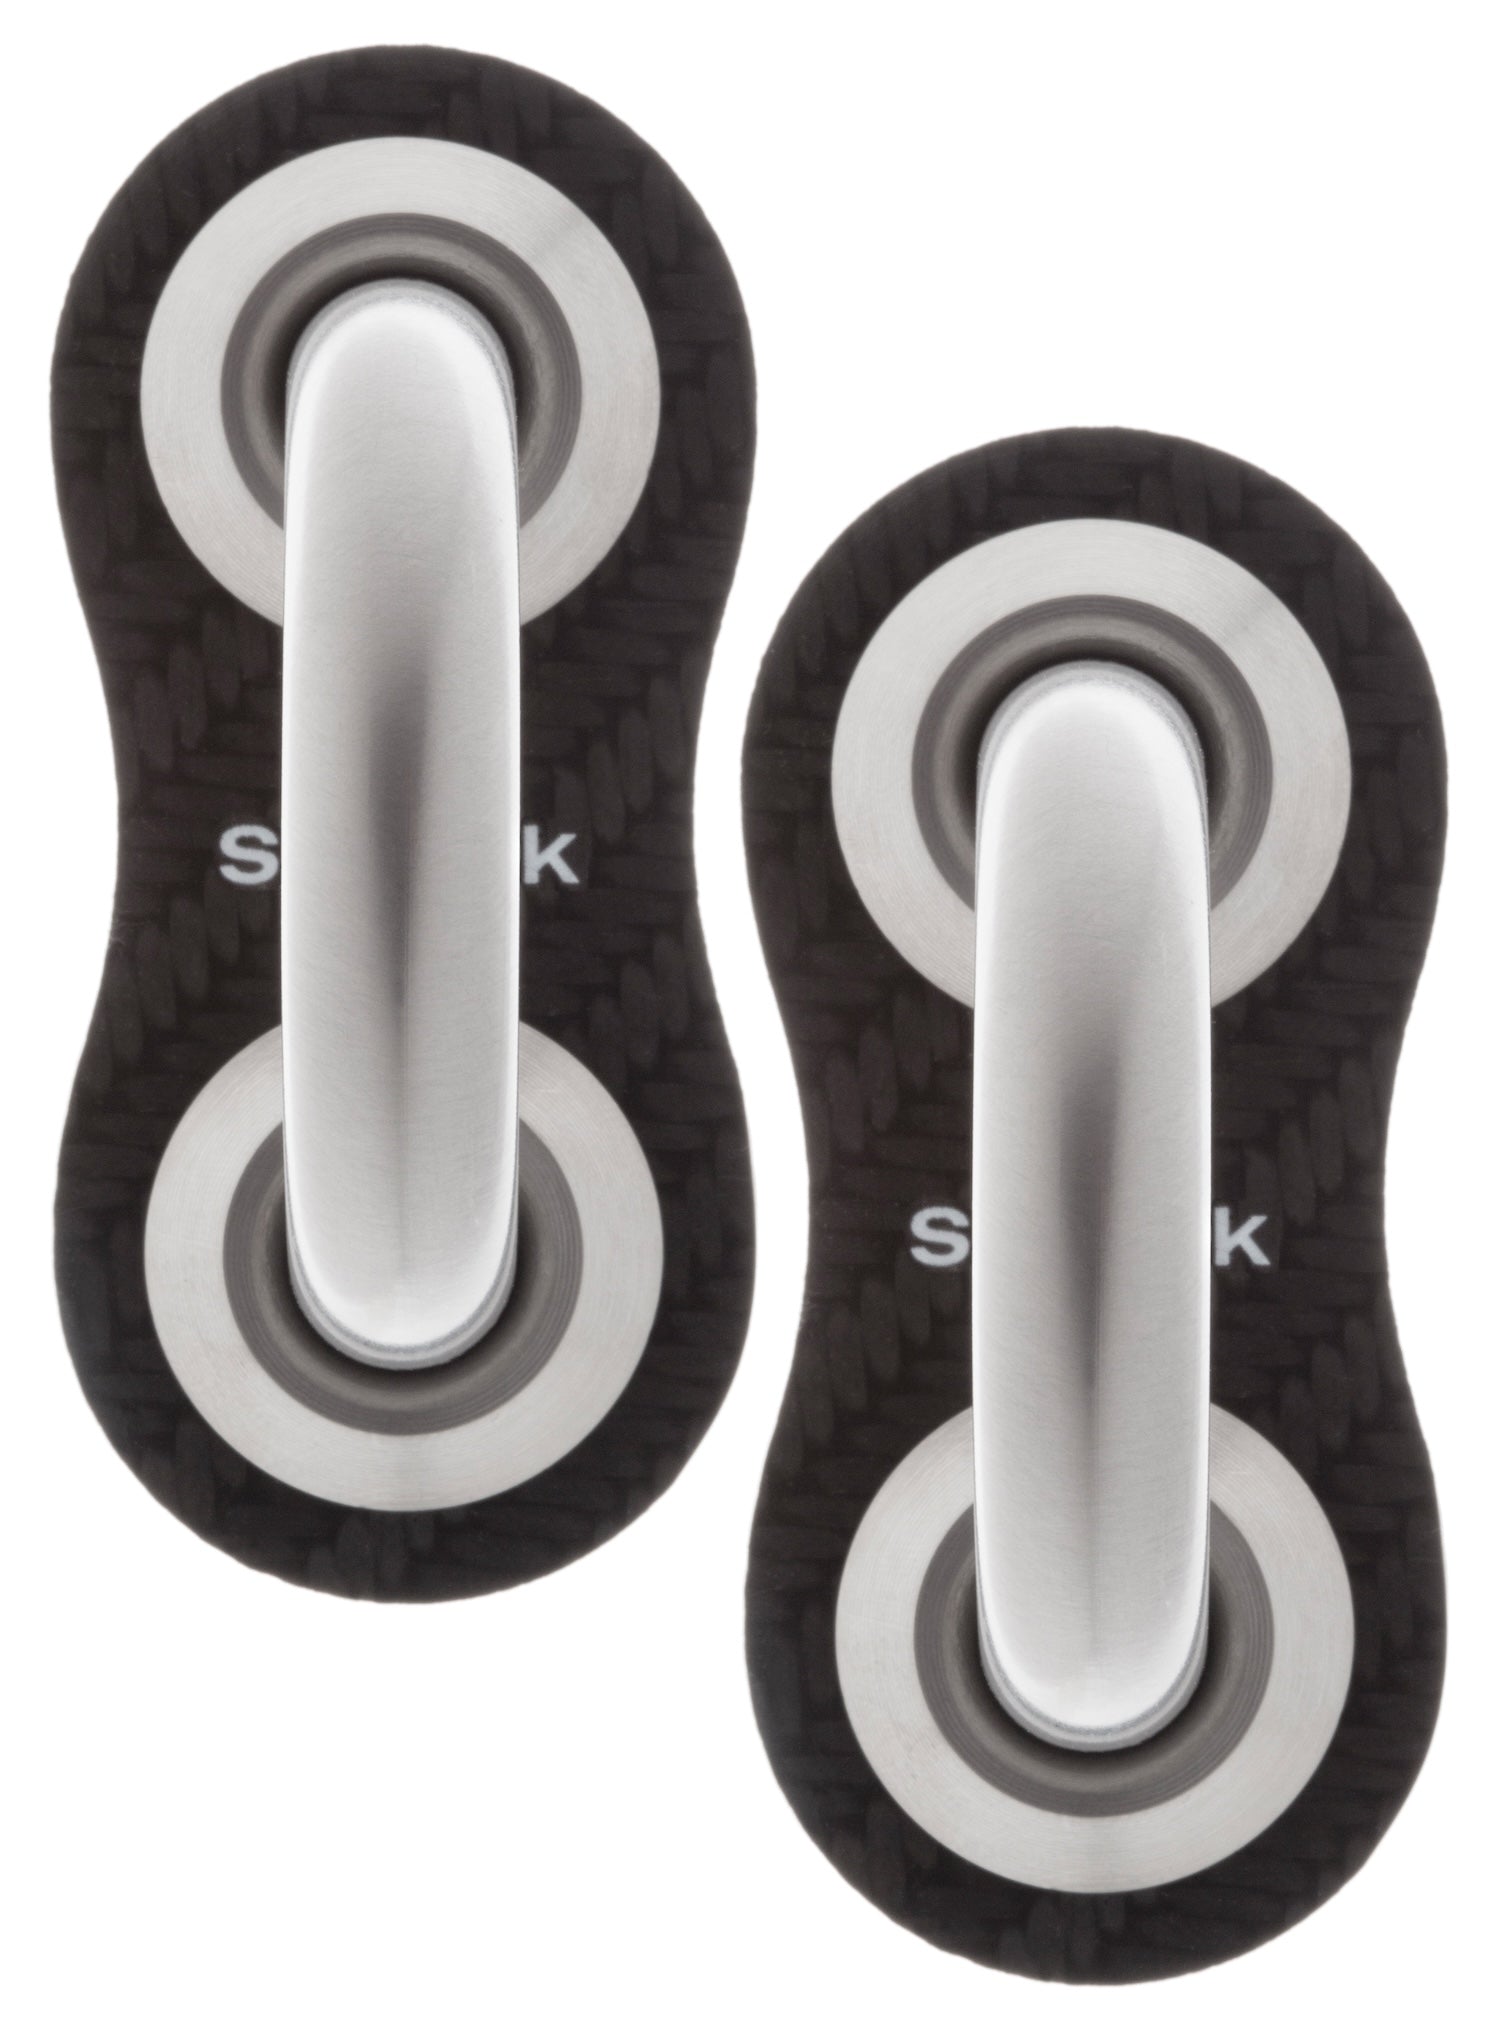 Spinlock High-Strength Padeye 10mm In 17-4PH with Carbon Plates | SendIt Sailing